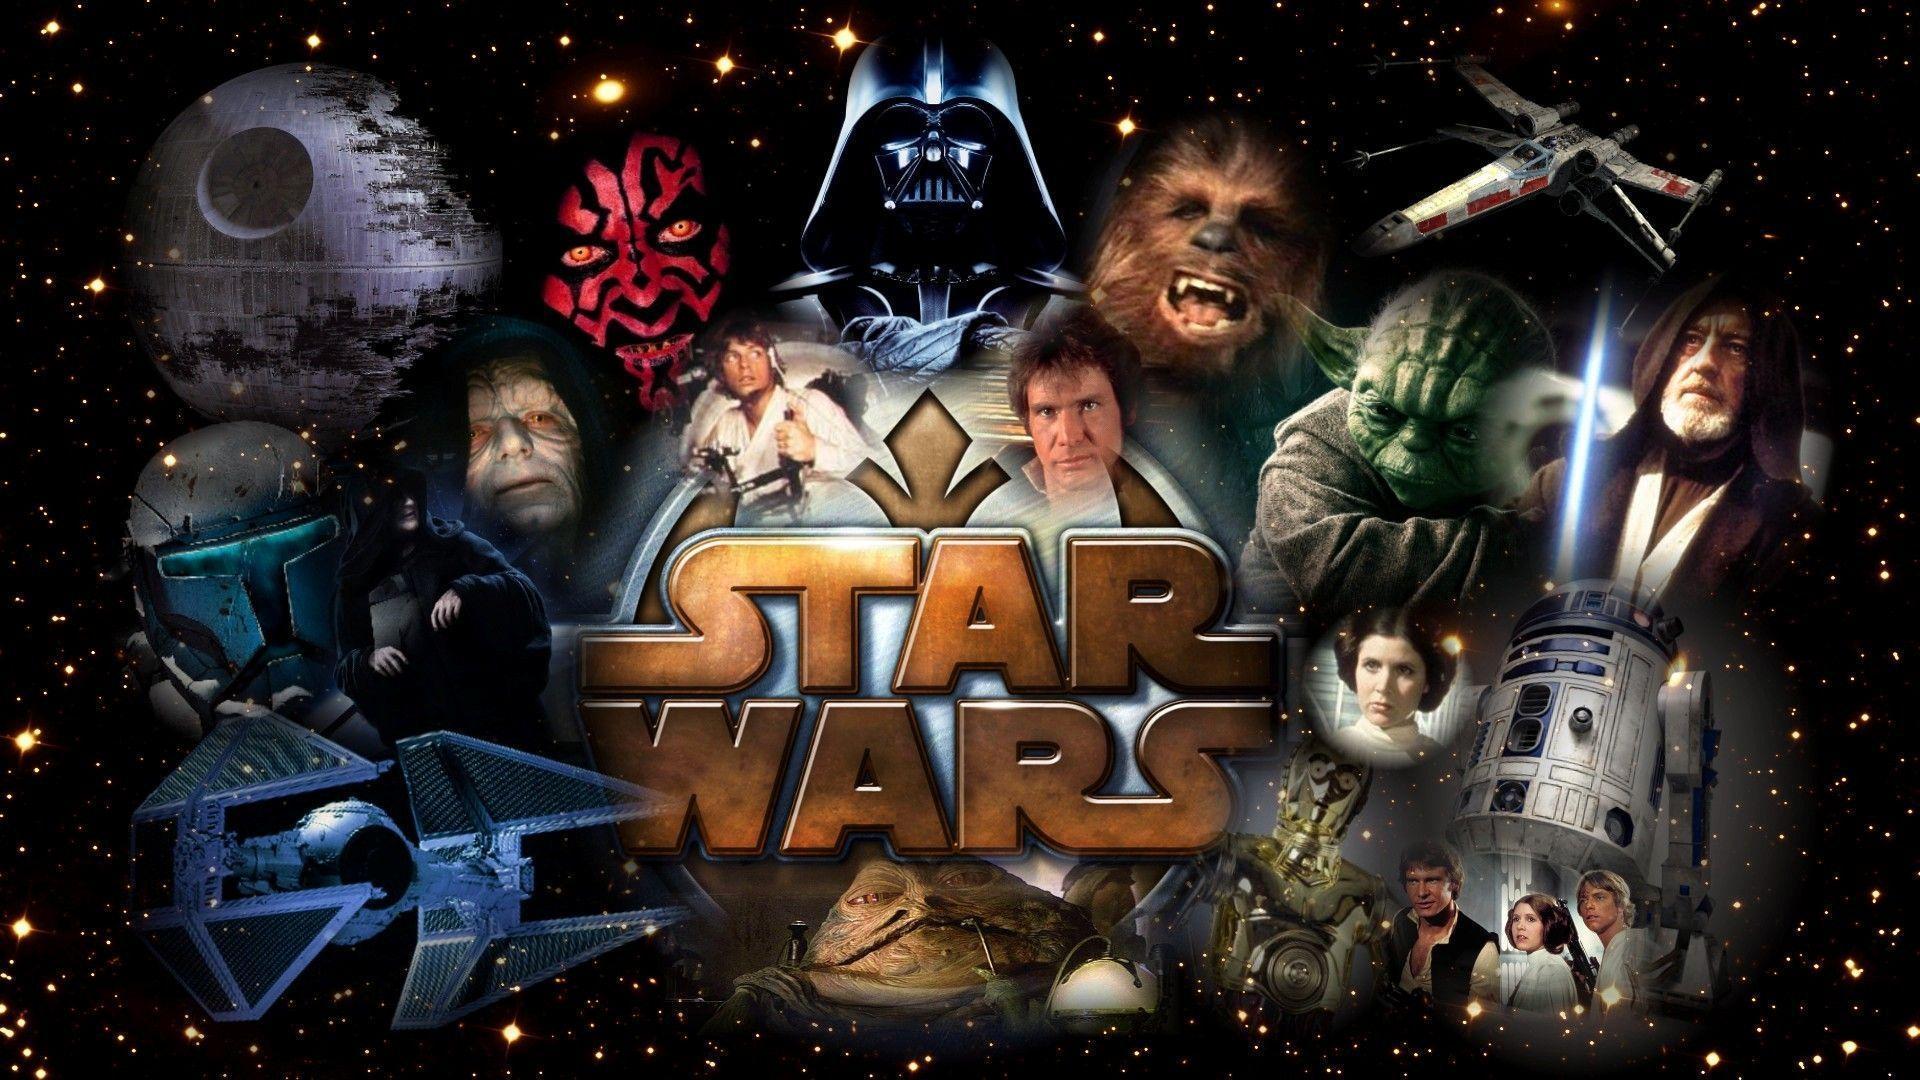 Star Wars Character in Movies